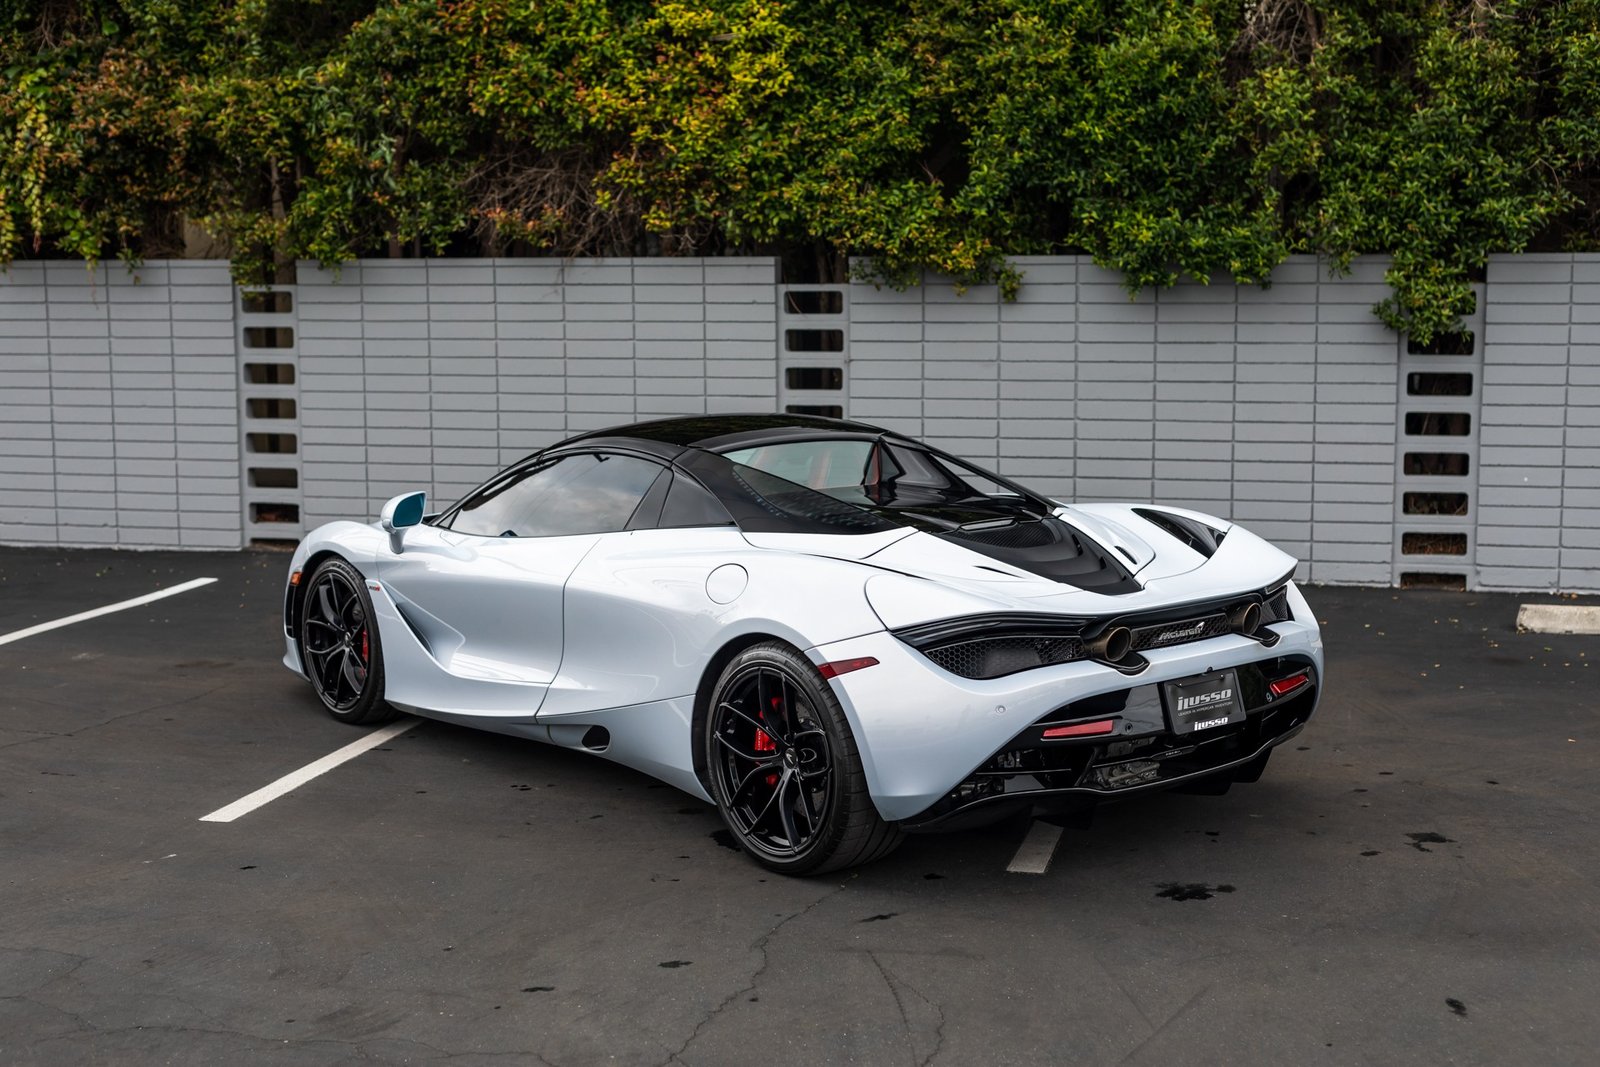 Used 2020 McLaren 720S Spider For Sale (4)